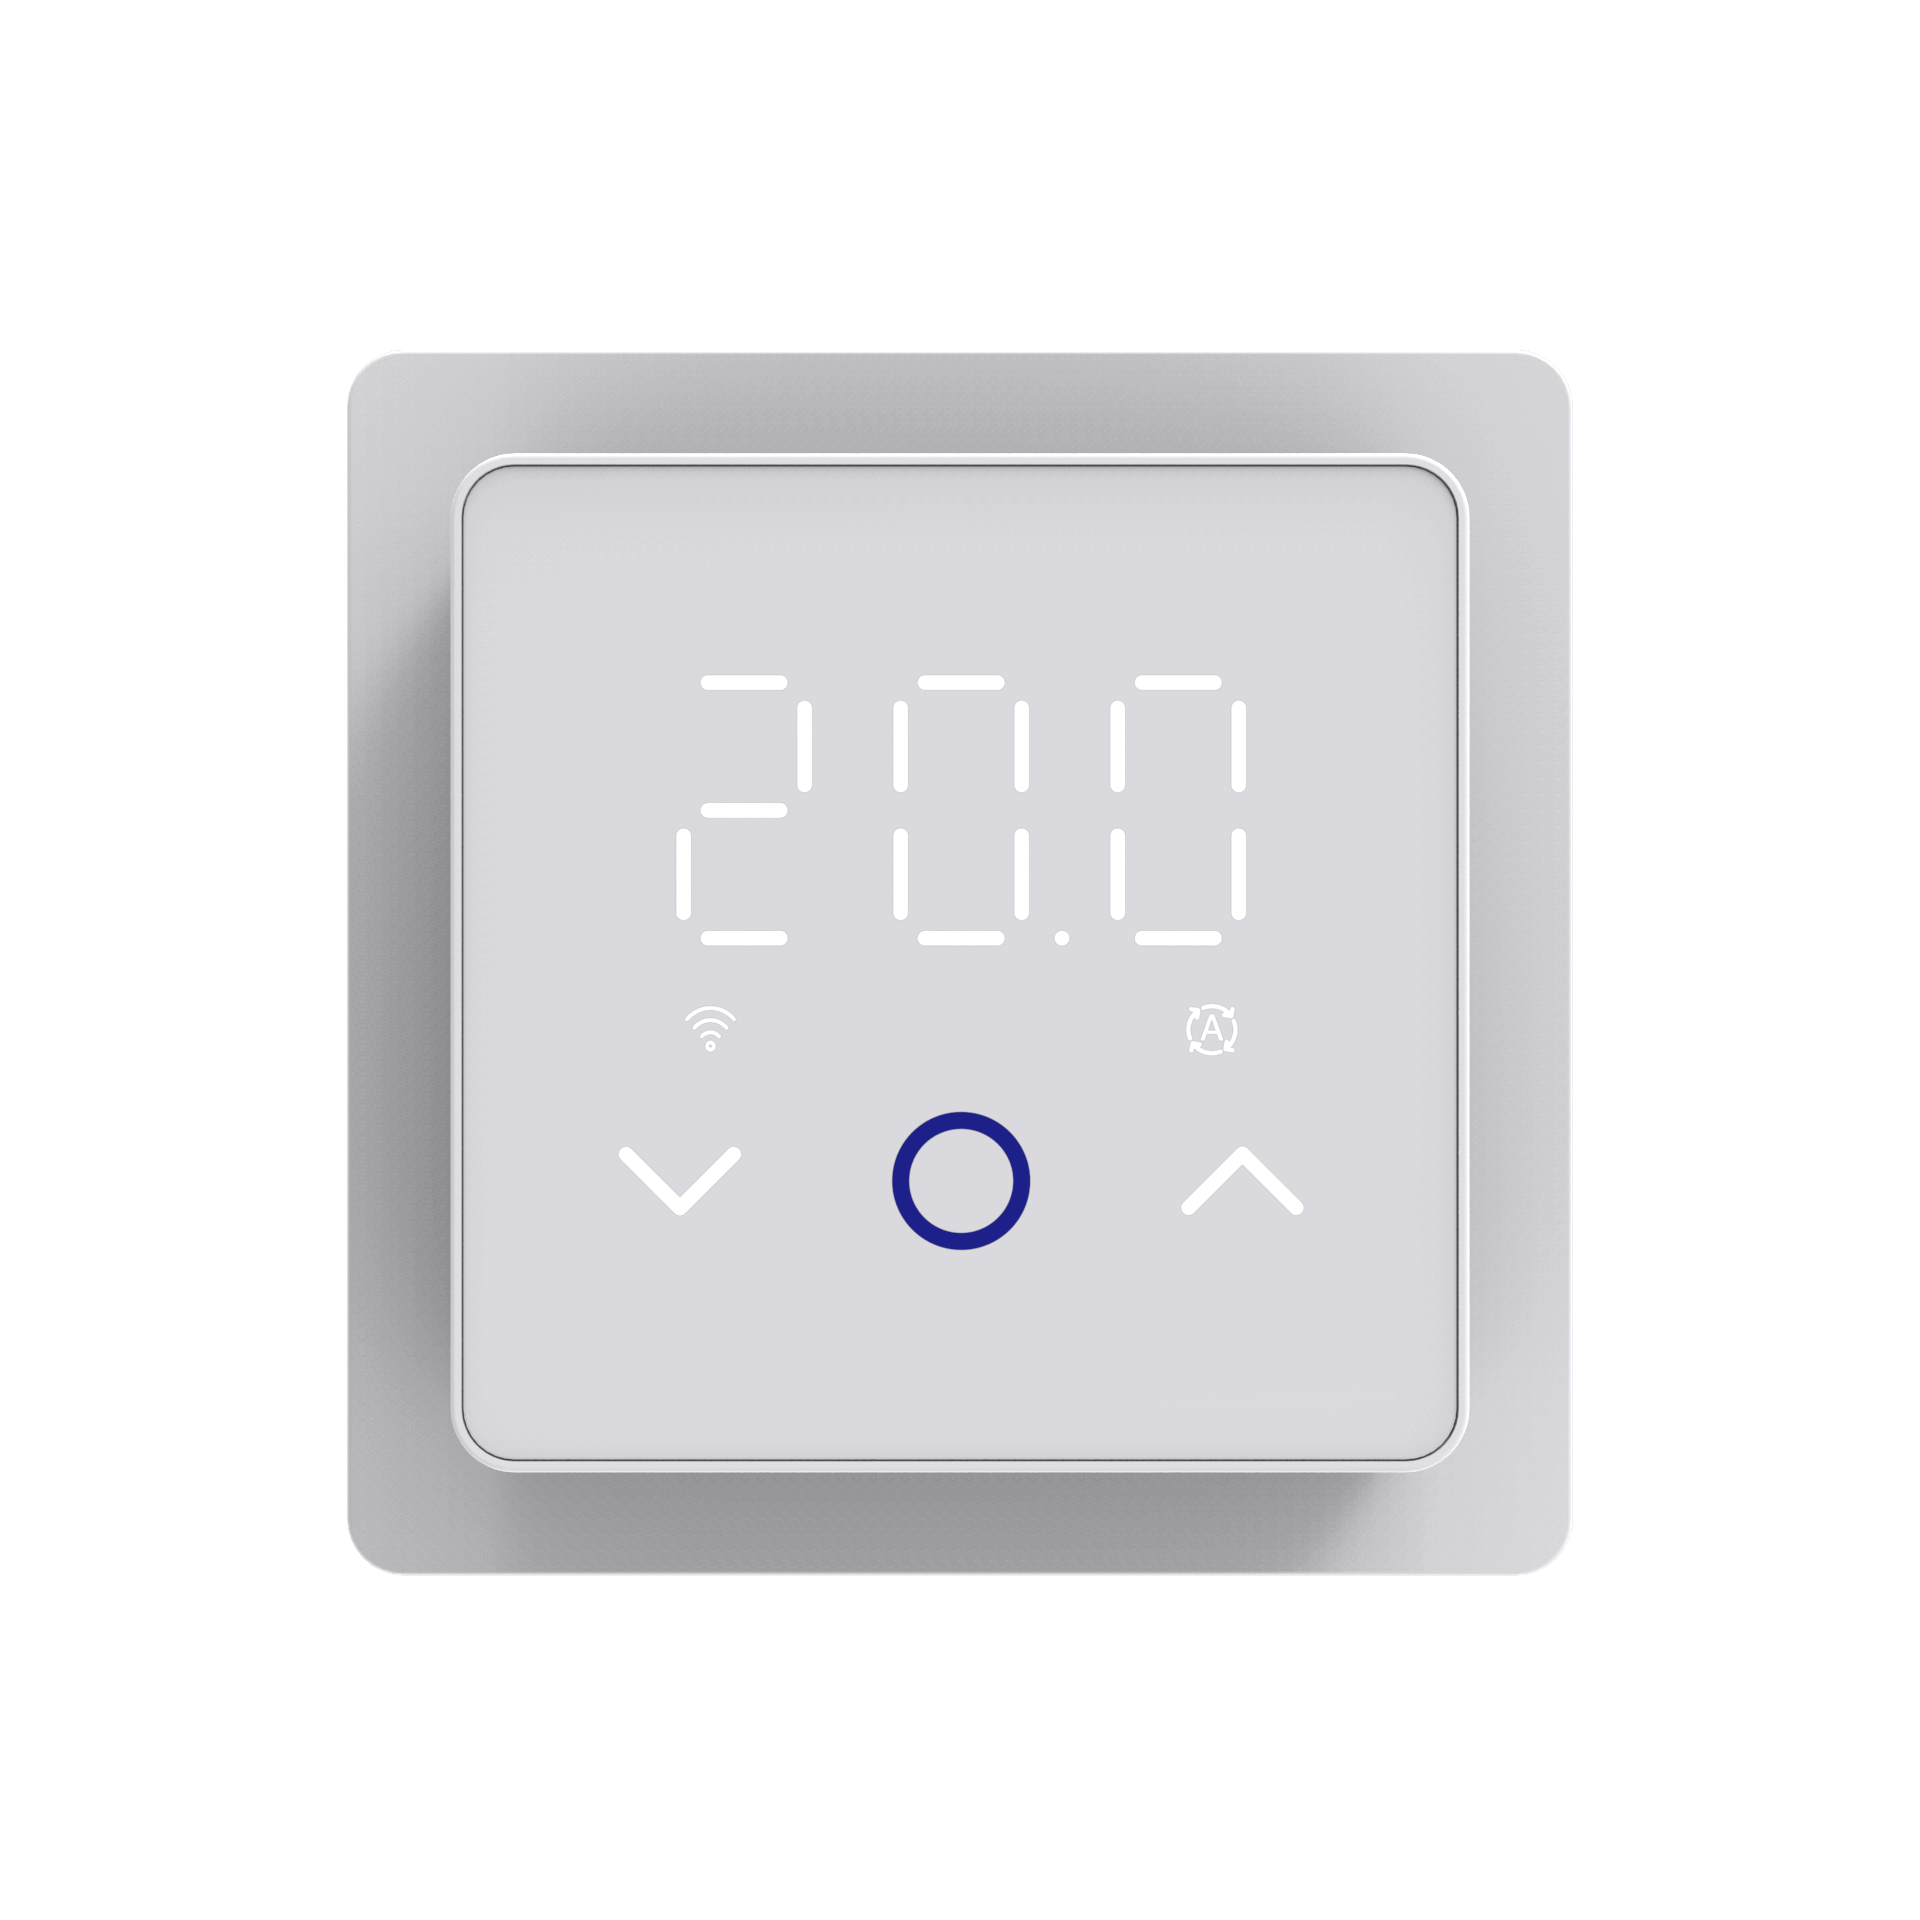 Smart Programmable Room Thermostat